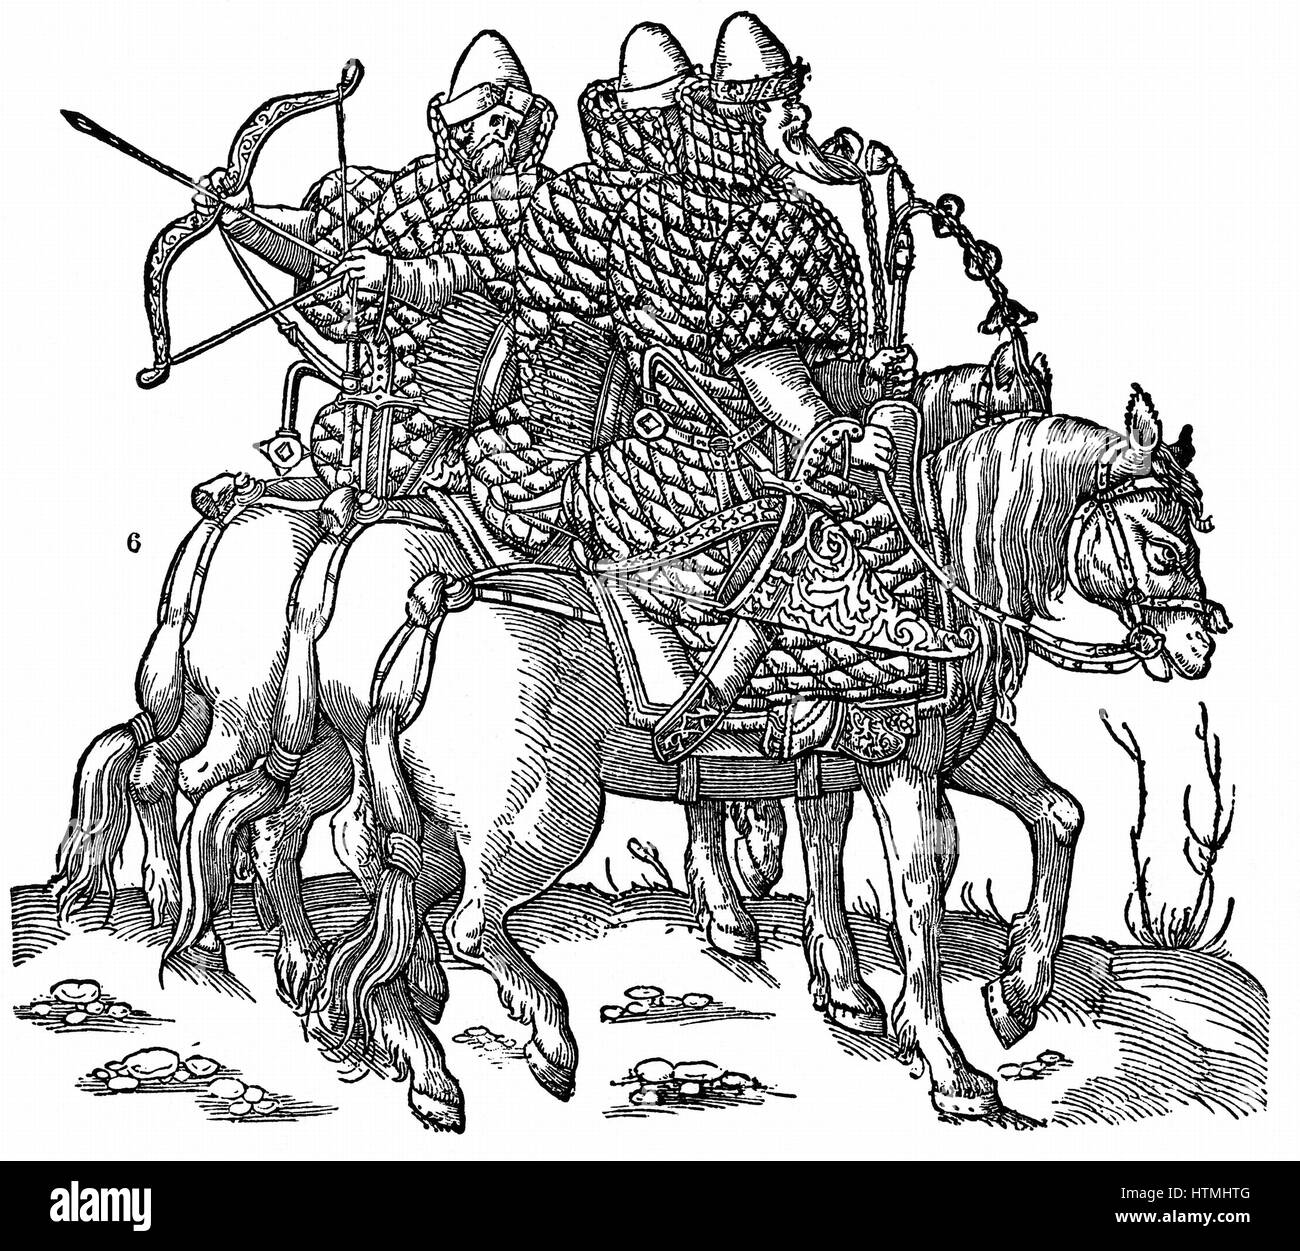 Mounted Muscovite warriors equipped with bows and arrow, swords and quilted armour. Woodcut 1556 Stock Photo